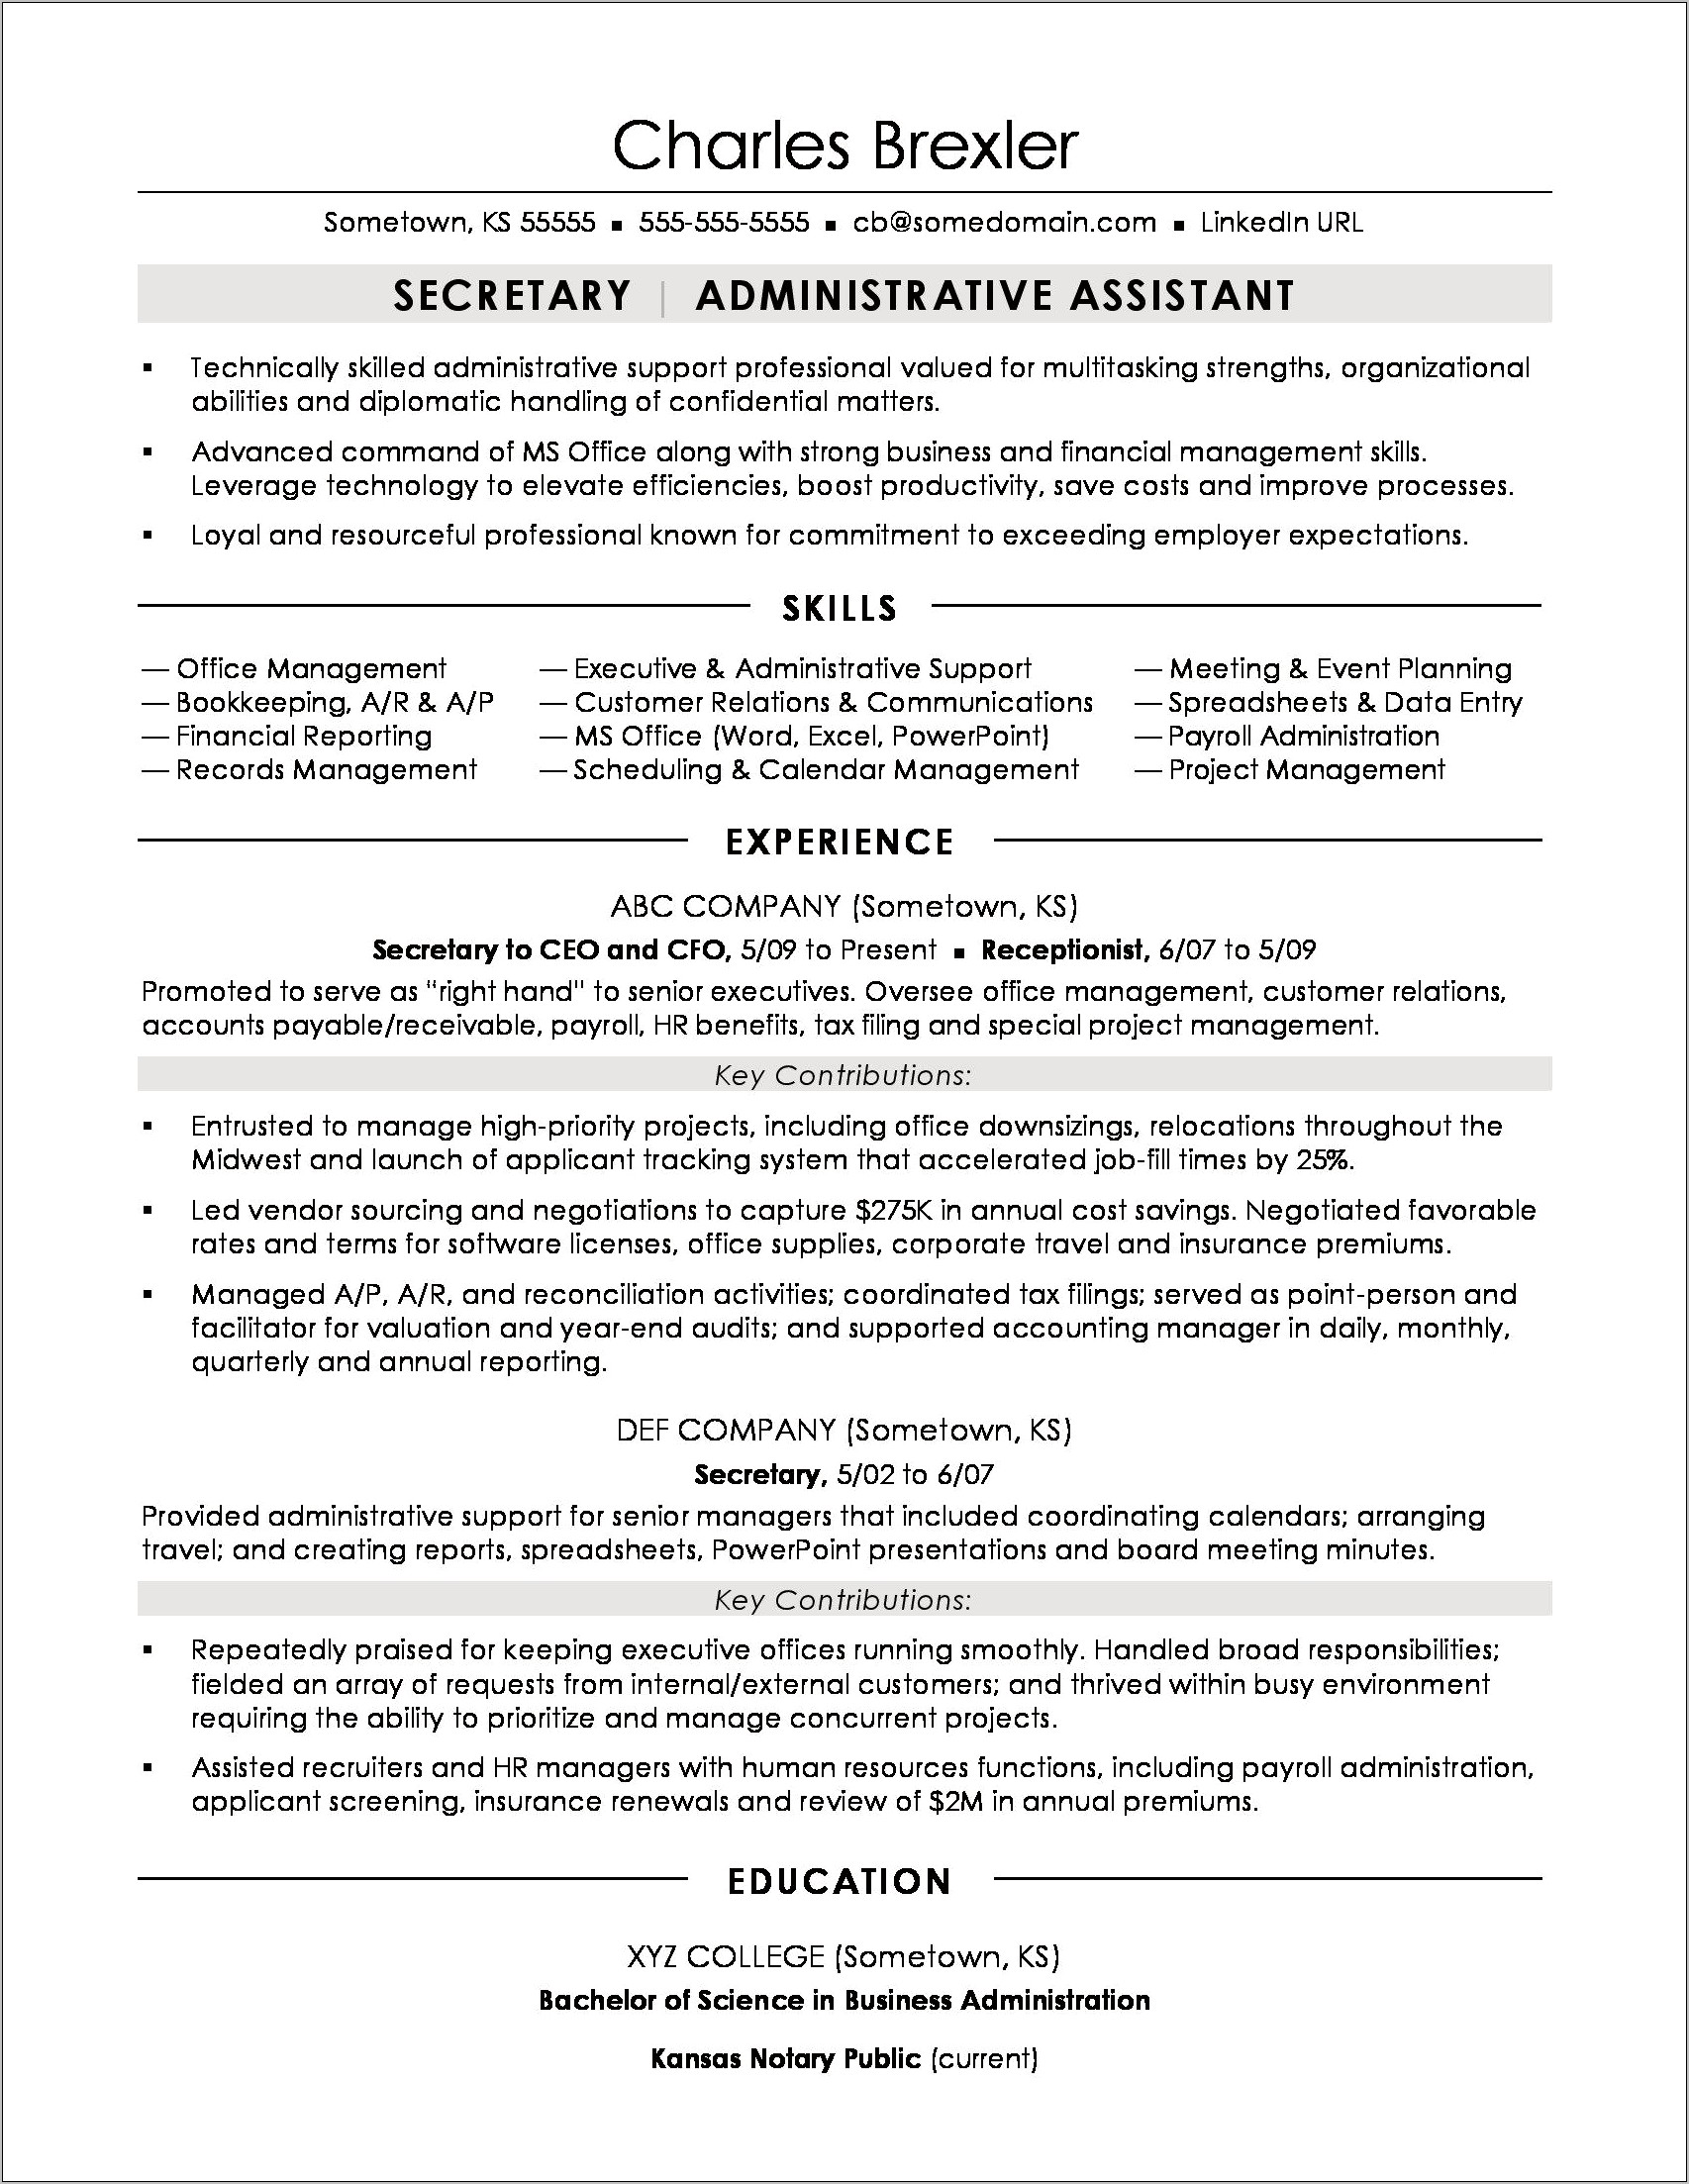 Examples Of Skills And Attributes For Resumes